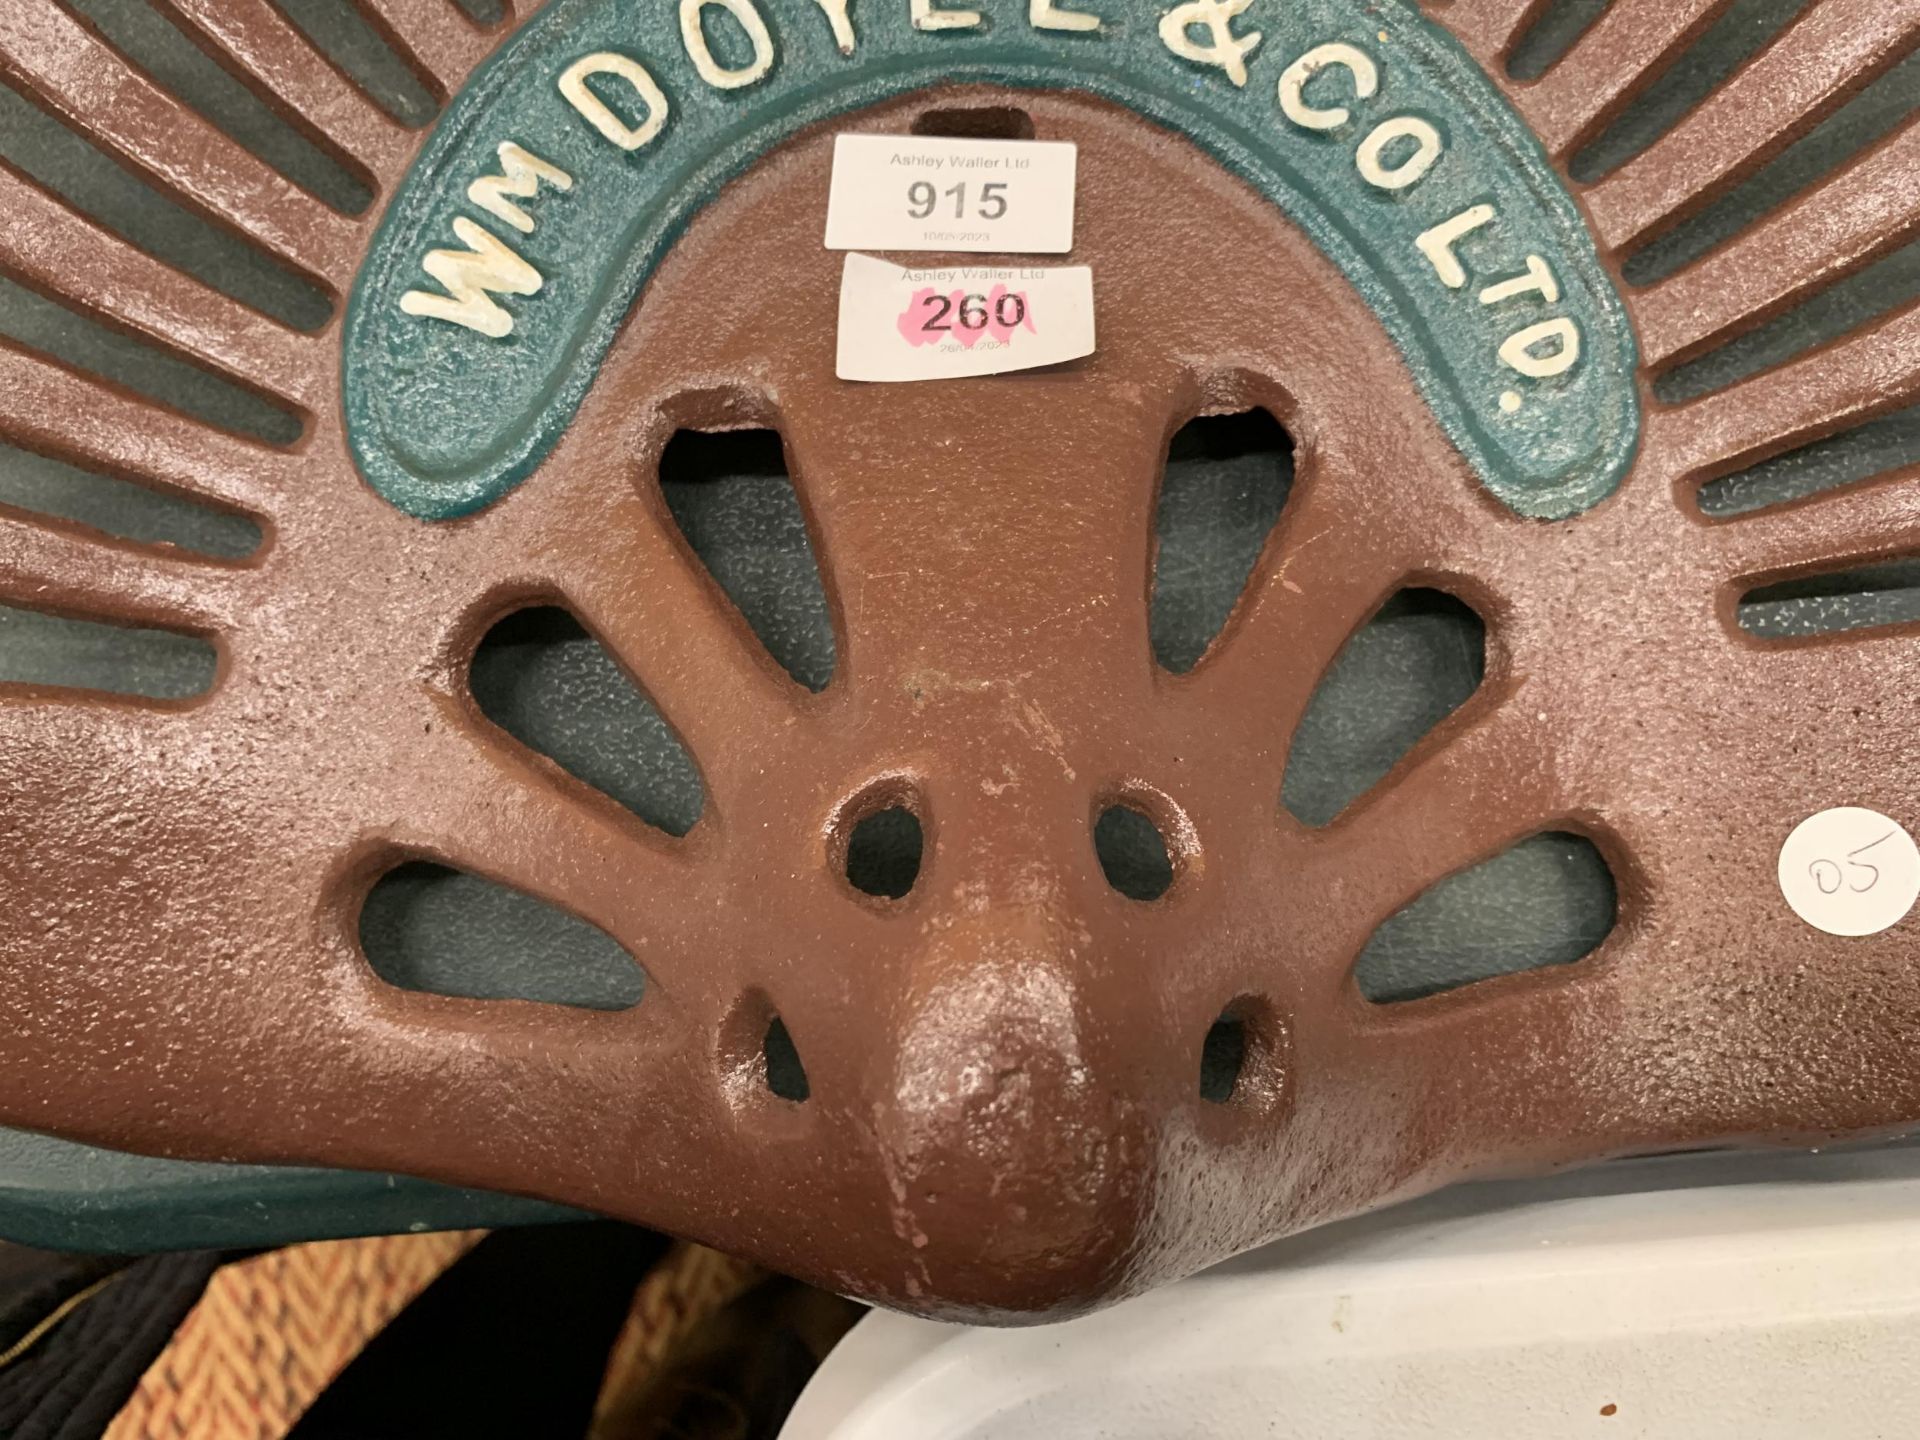 A CAST METAL WM DOYLE & CO LTD IMPLEMENT / TRACTOR SEAT - Image 3 of 4